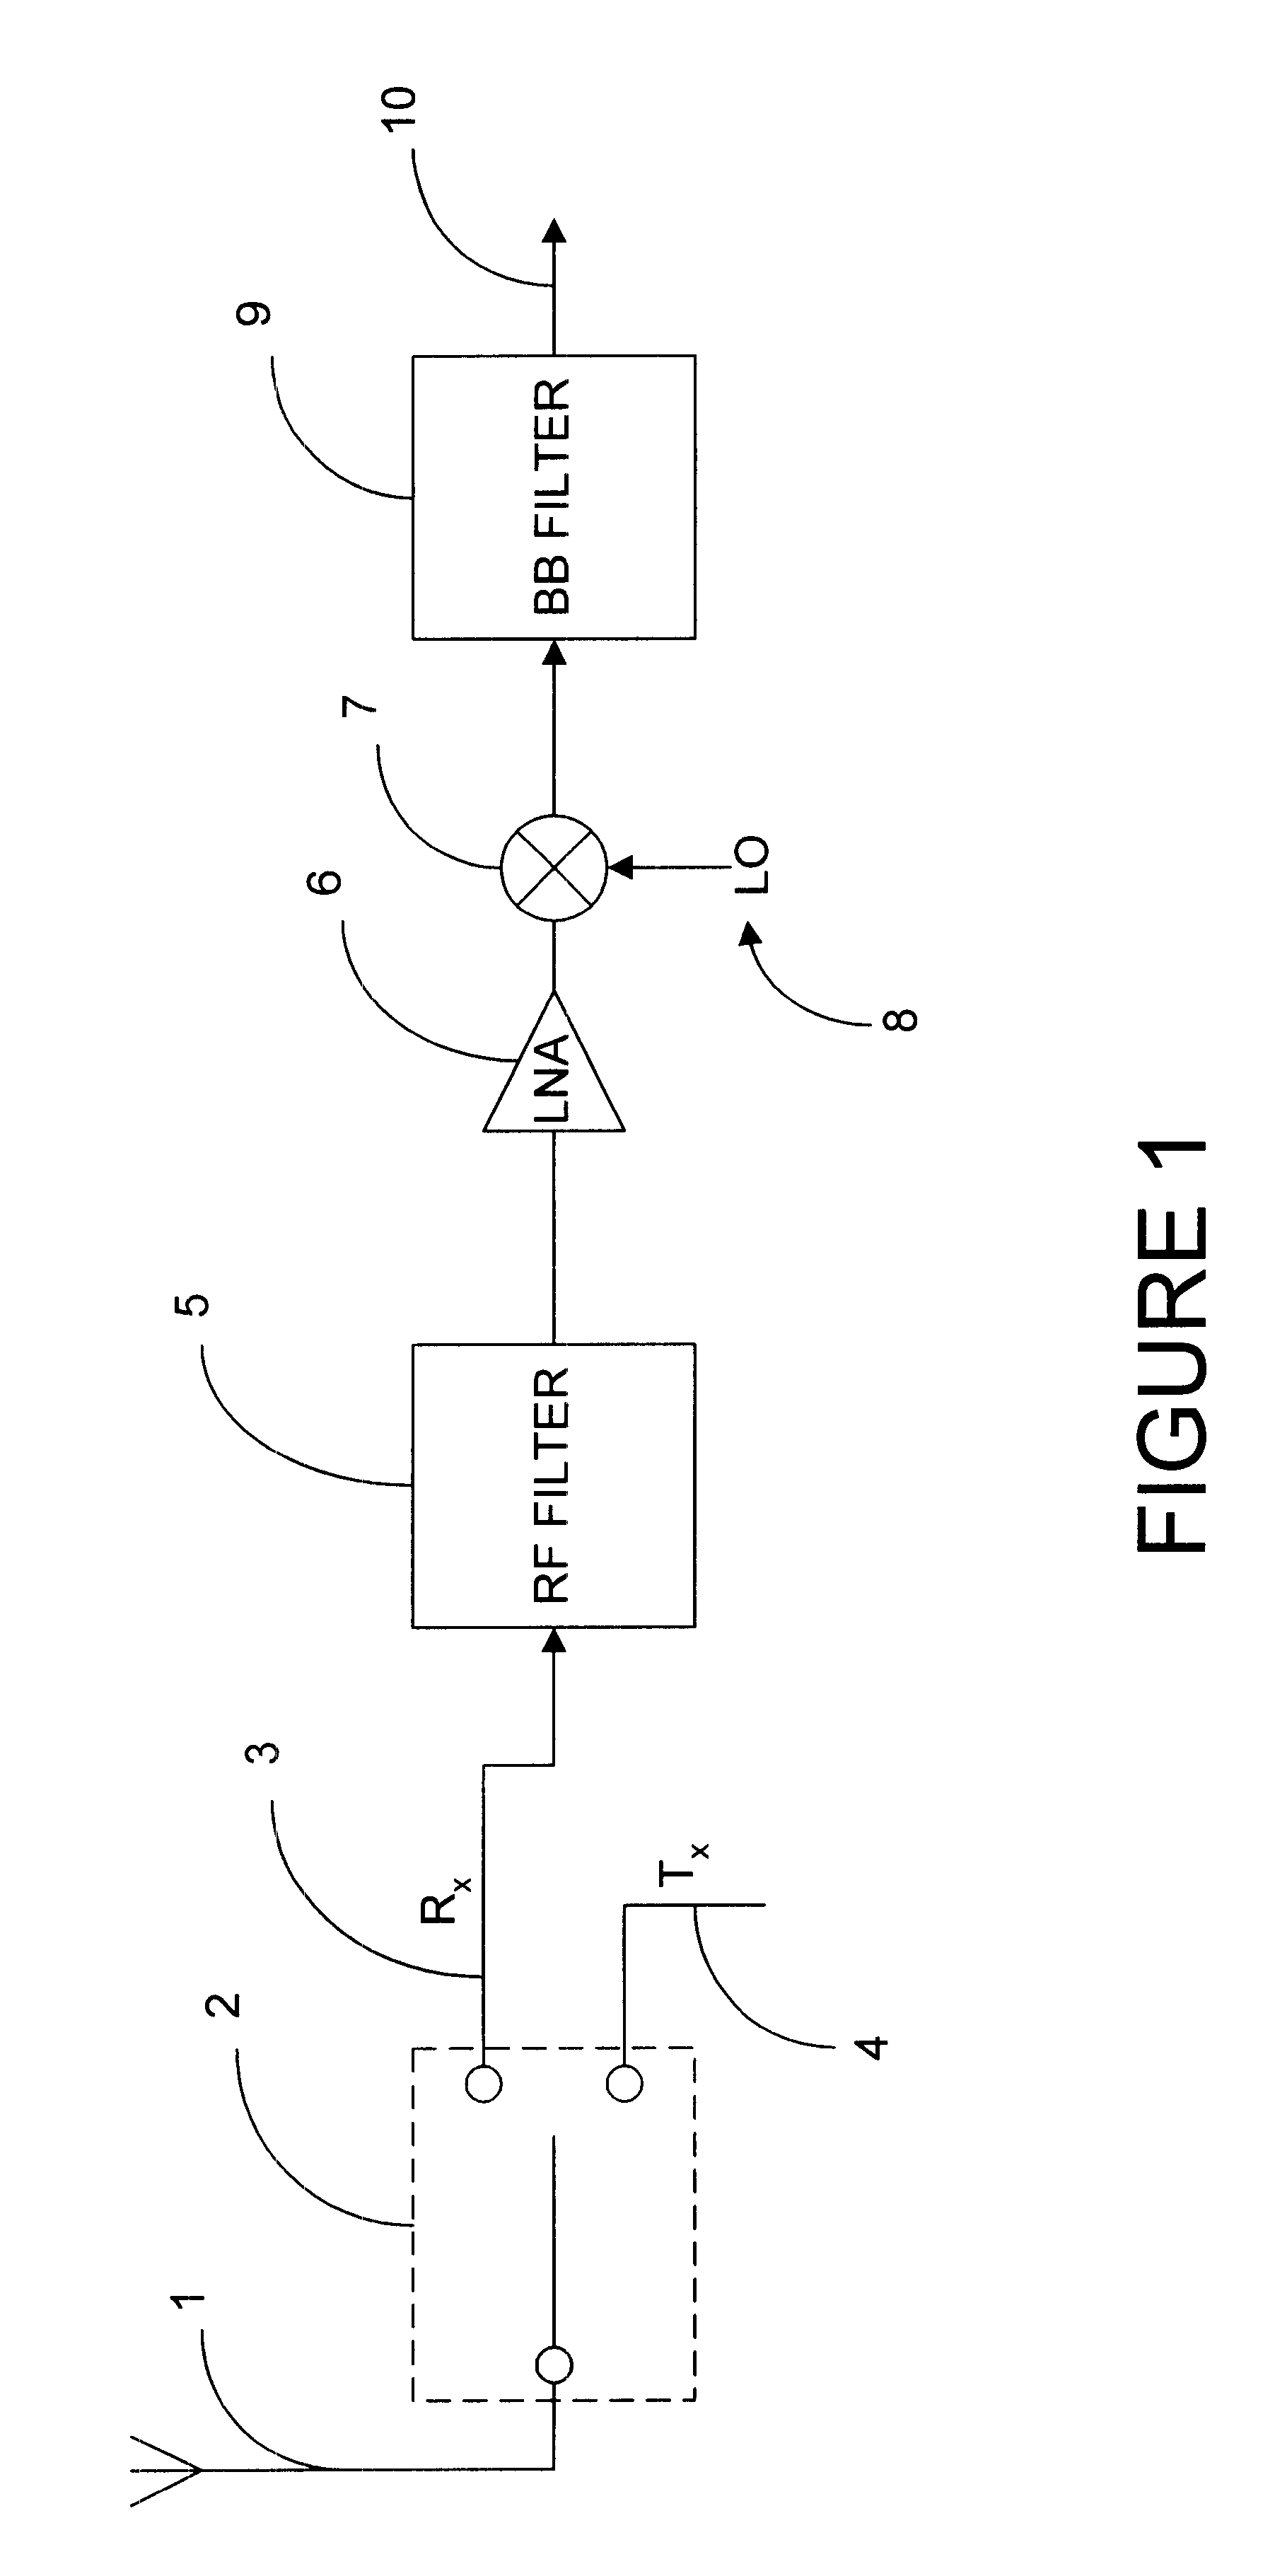 Multi-band filter system for wireless communication receiver